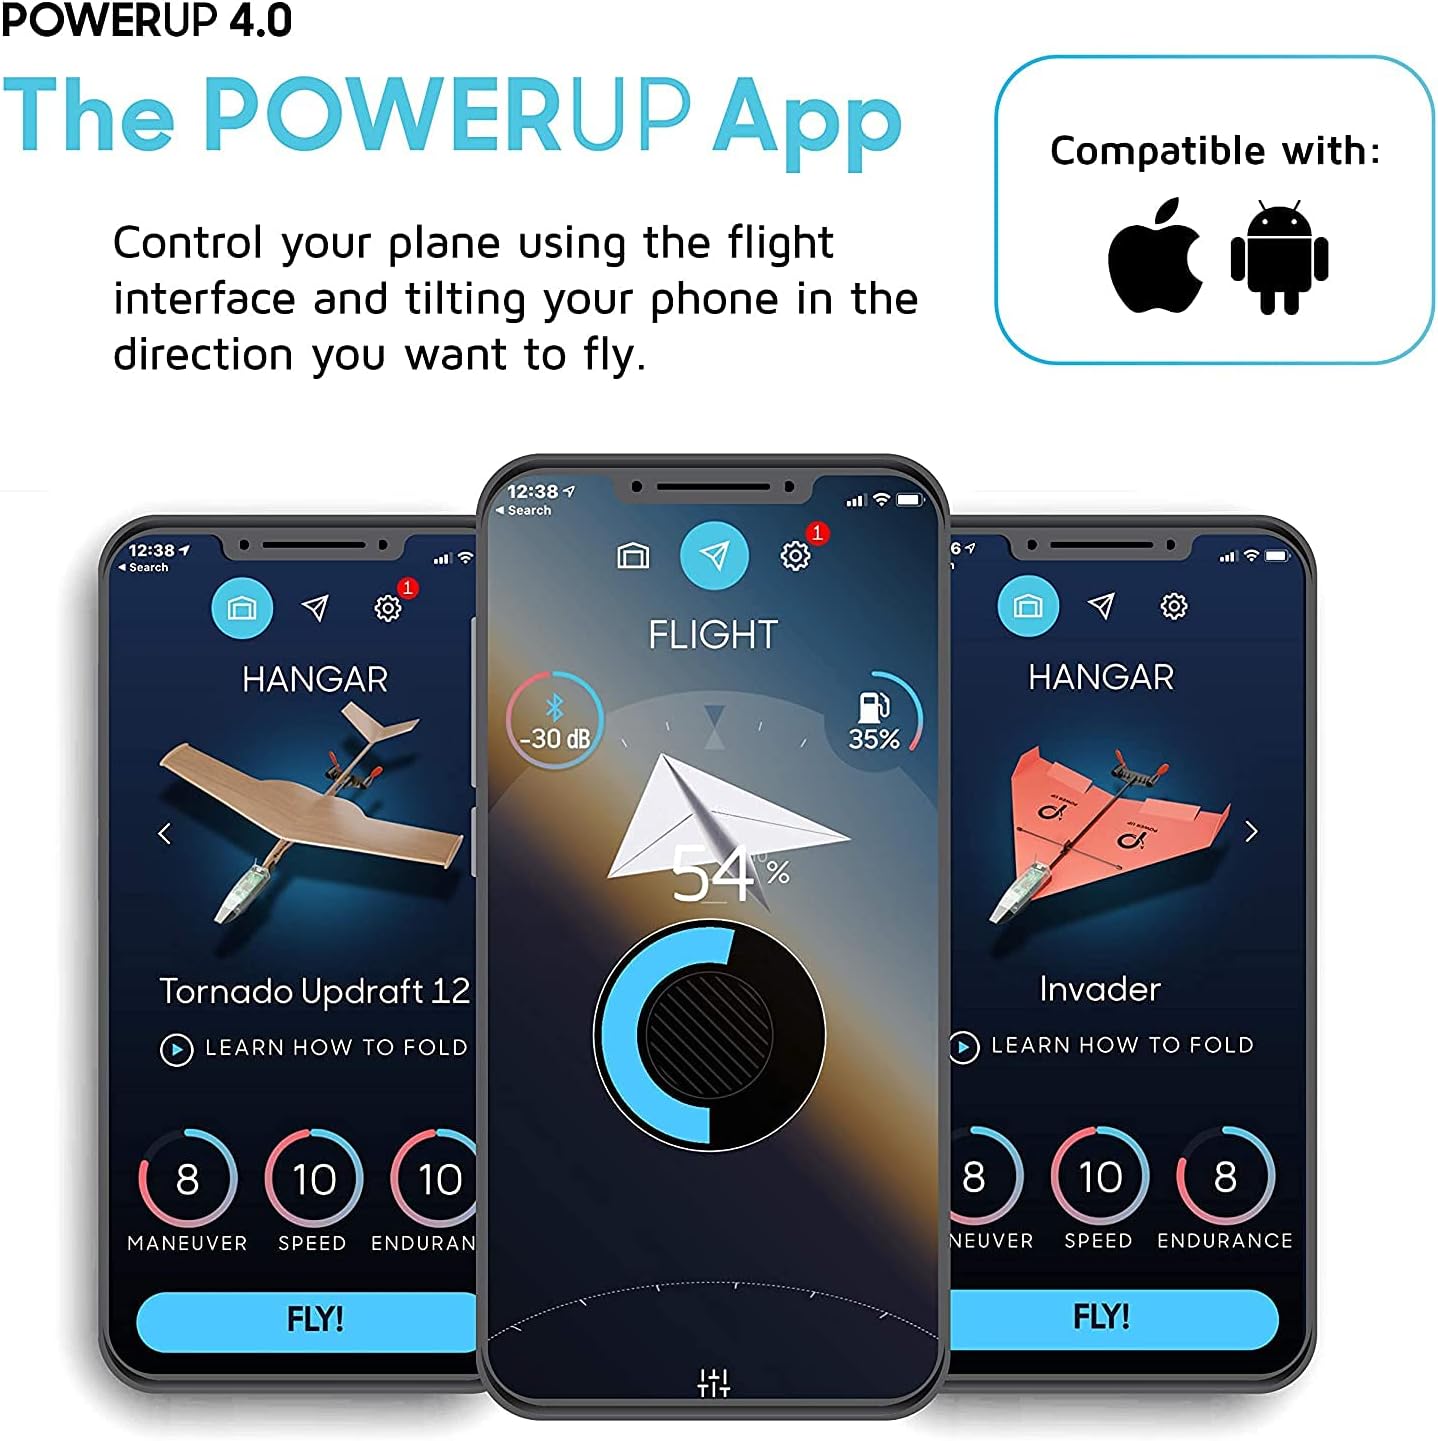 POWERUP 4.0 Paper Next Generation Smartphone Controlled